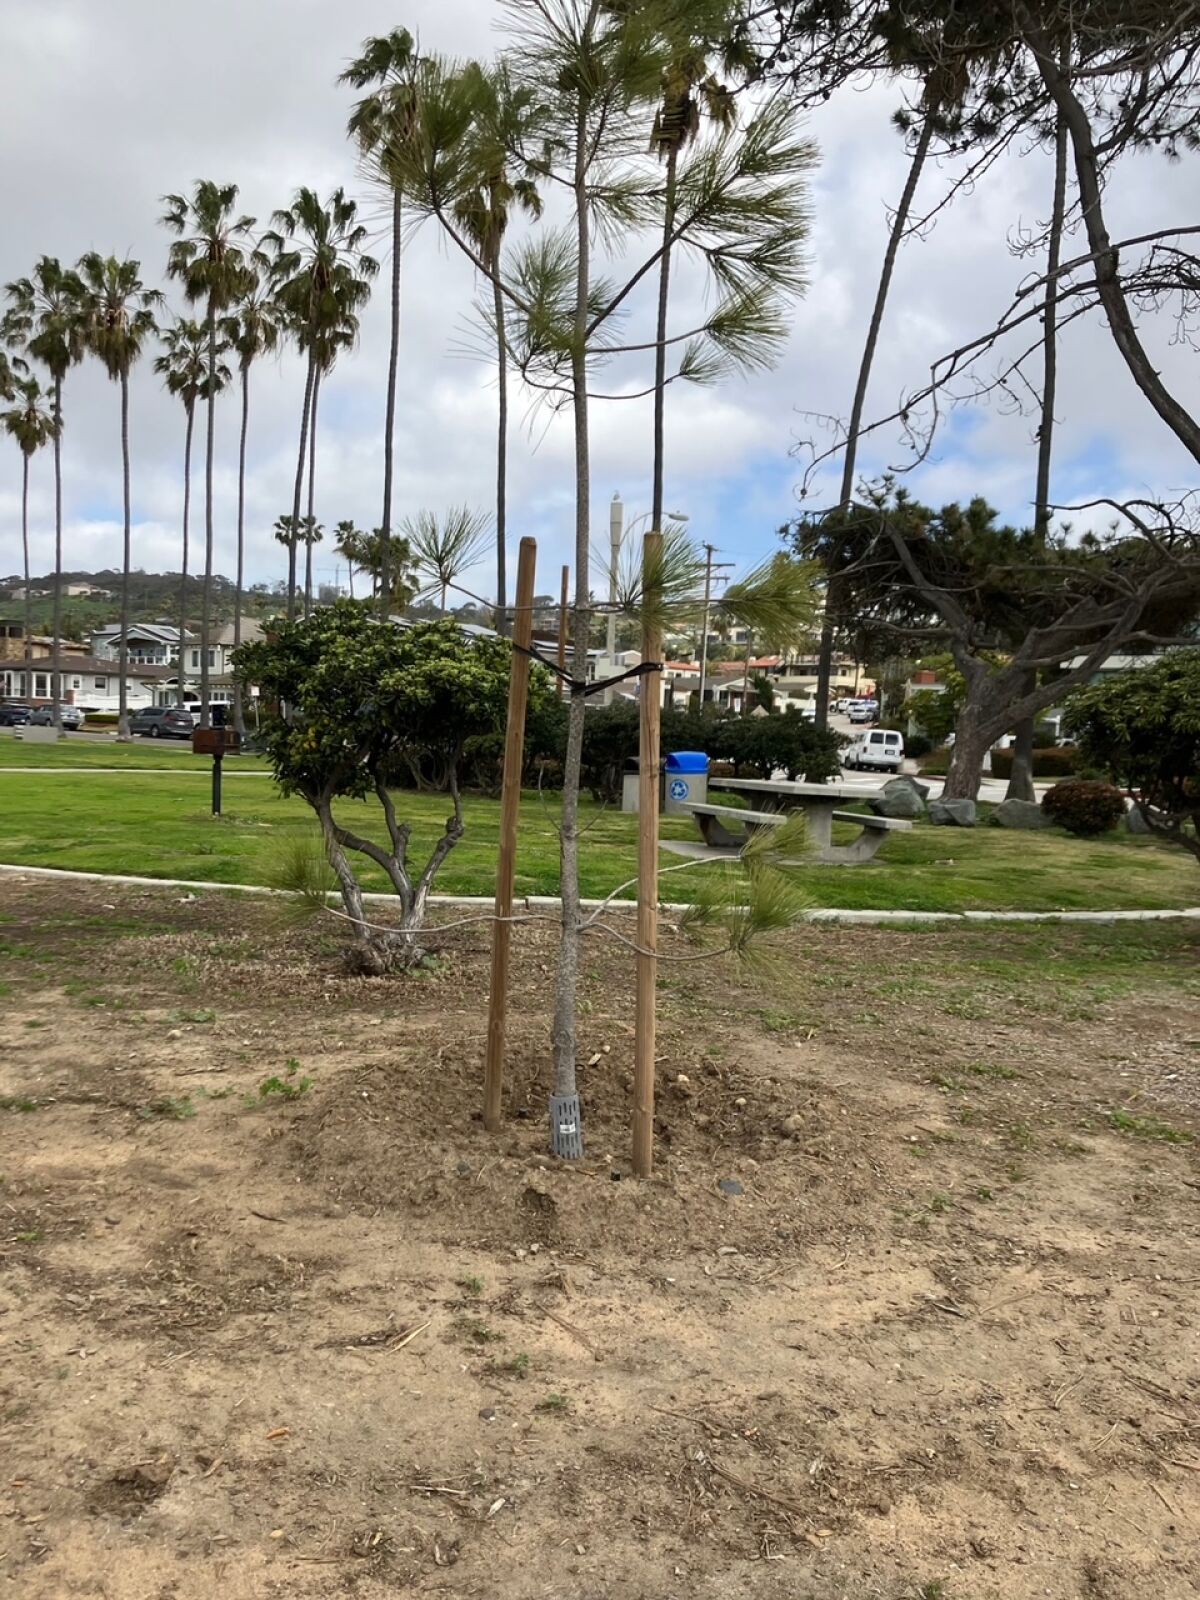 Four new trees have been planted in Kellogg Park.